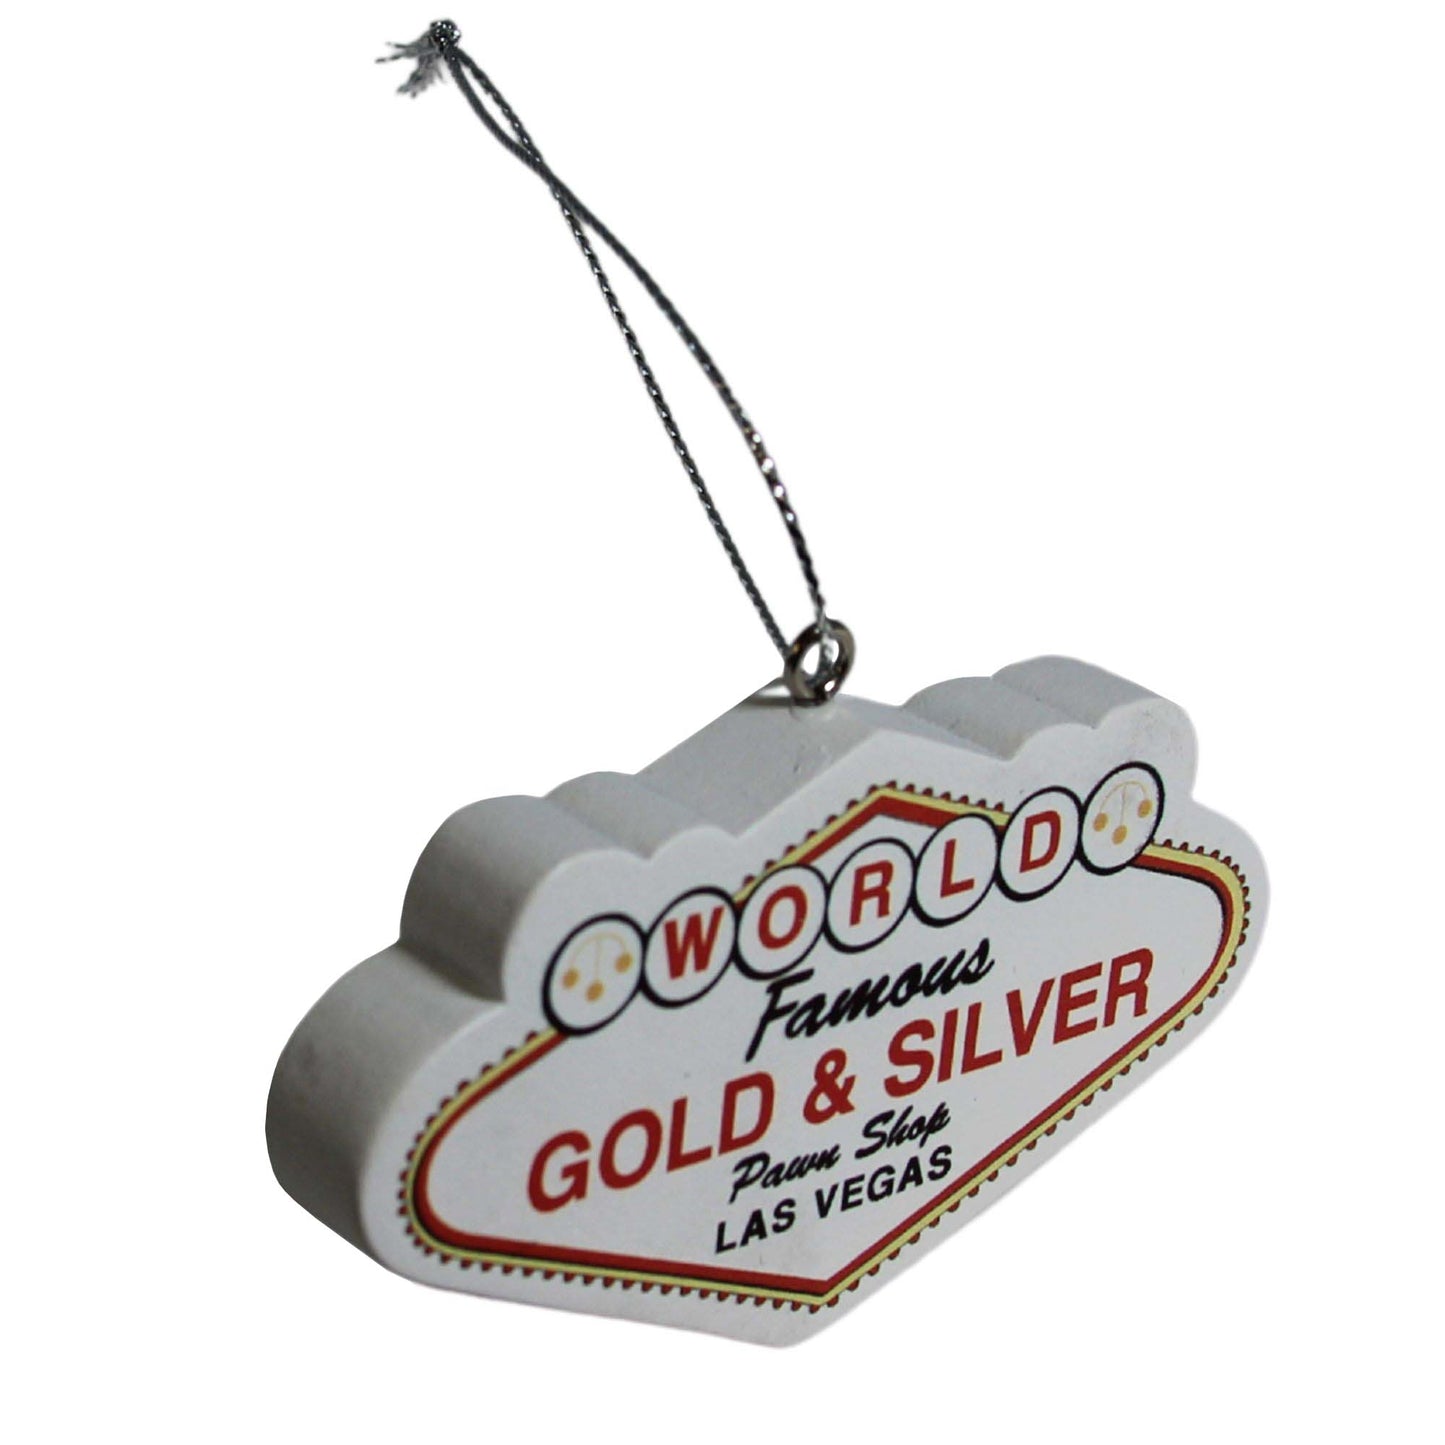 Gold & Silver Pawn Shop Vegas Sign Christmas Ornament